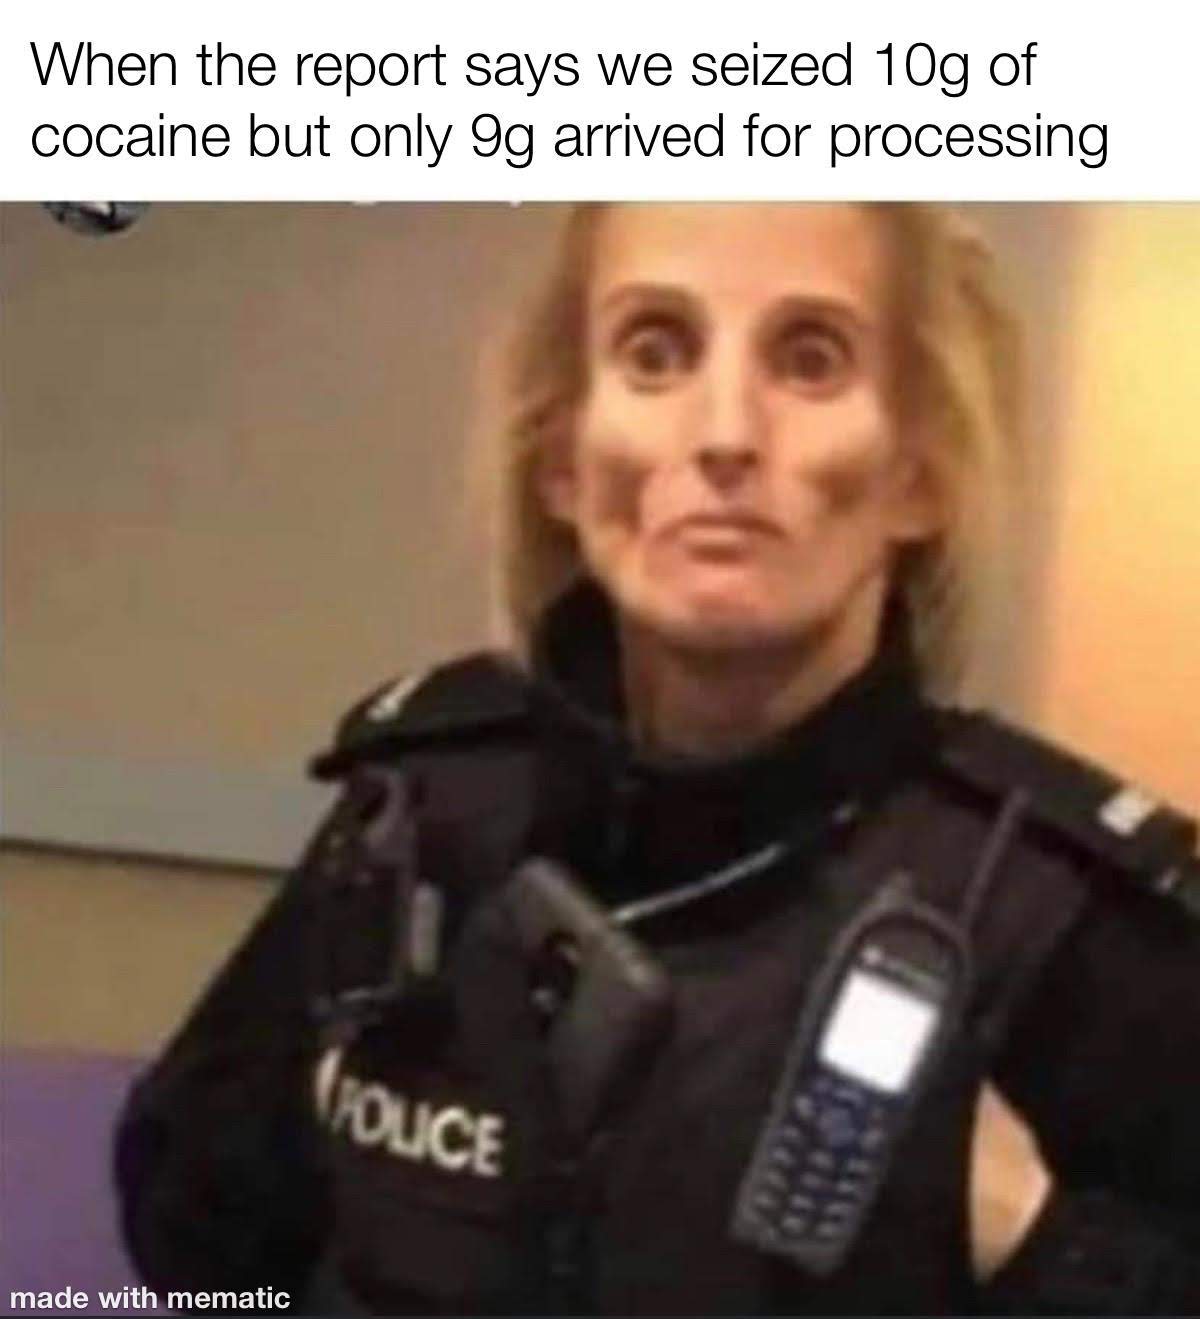 she looks like she smoked the evidence room - When the report says we seized 10g of cocaine but only og arrived for processing Voice made with mematic